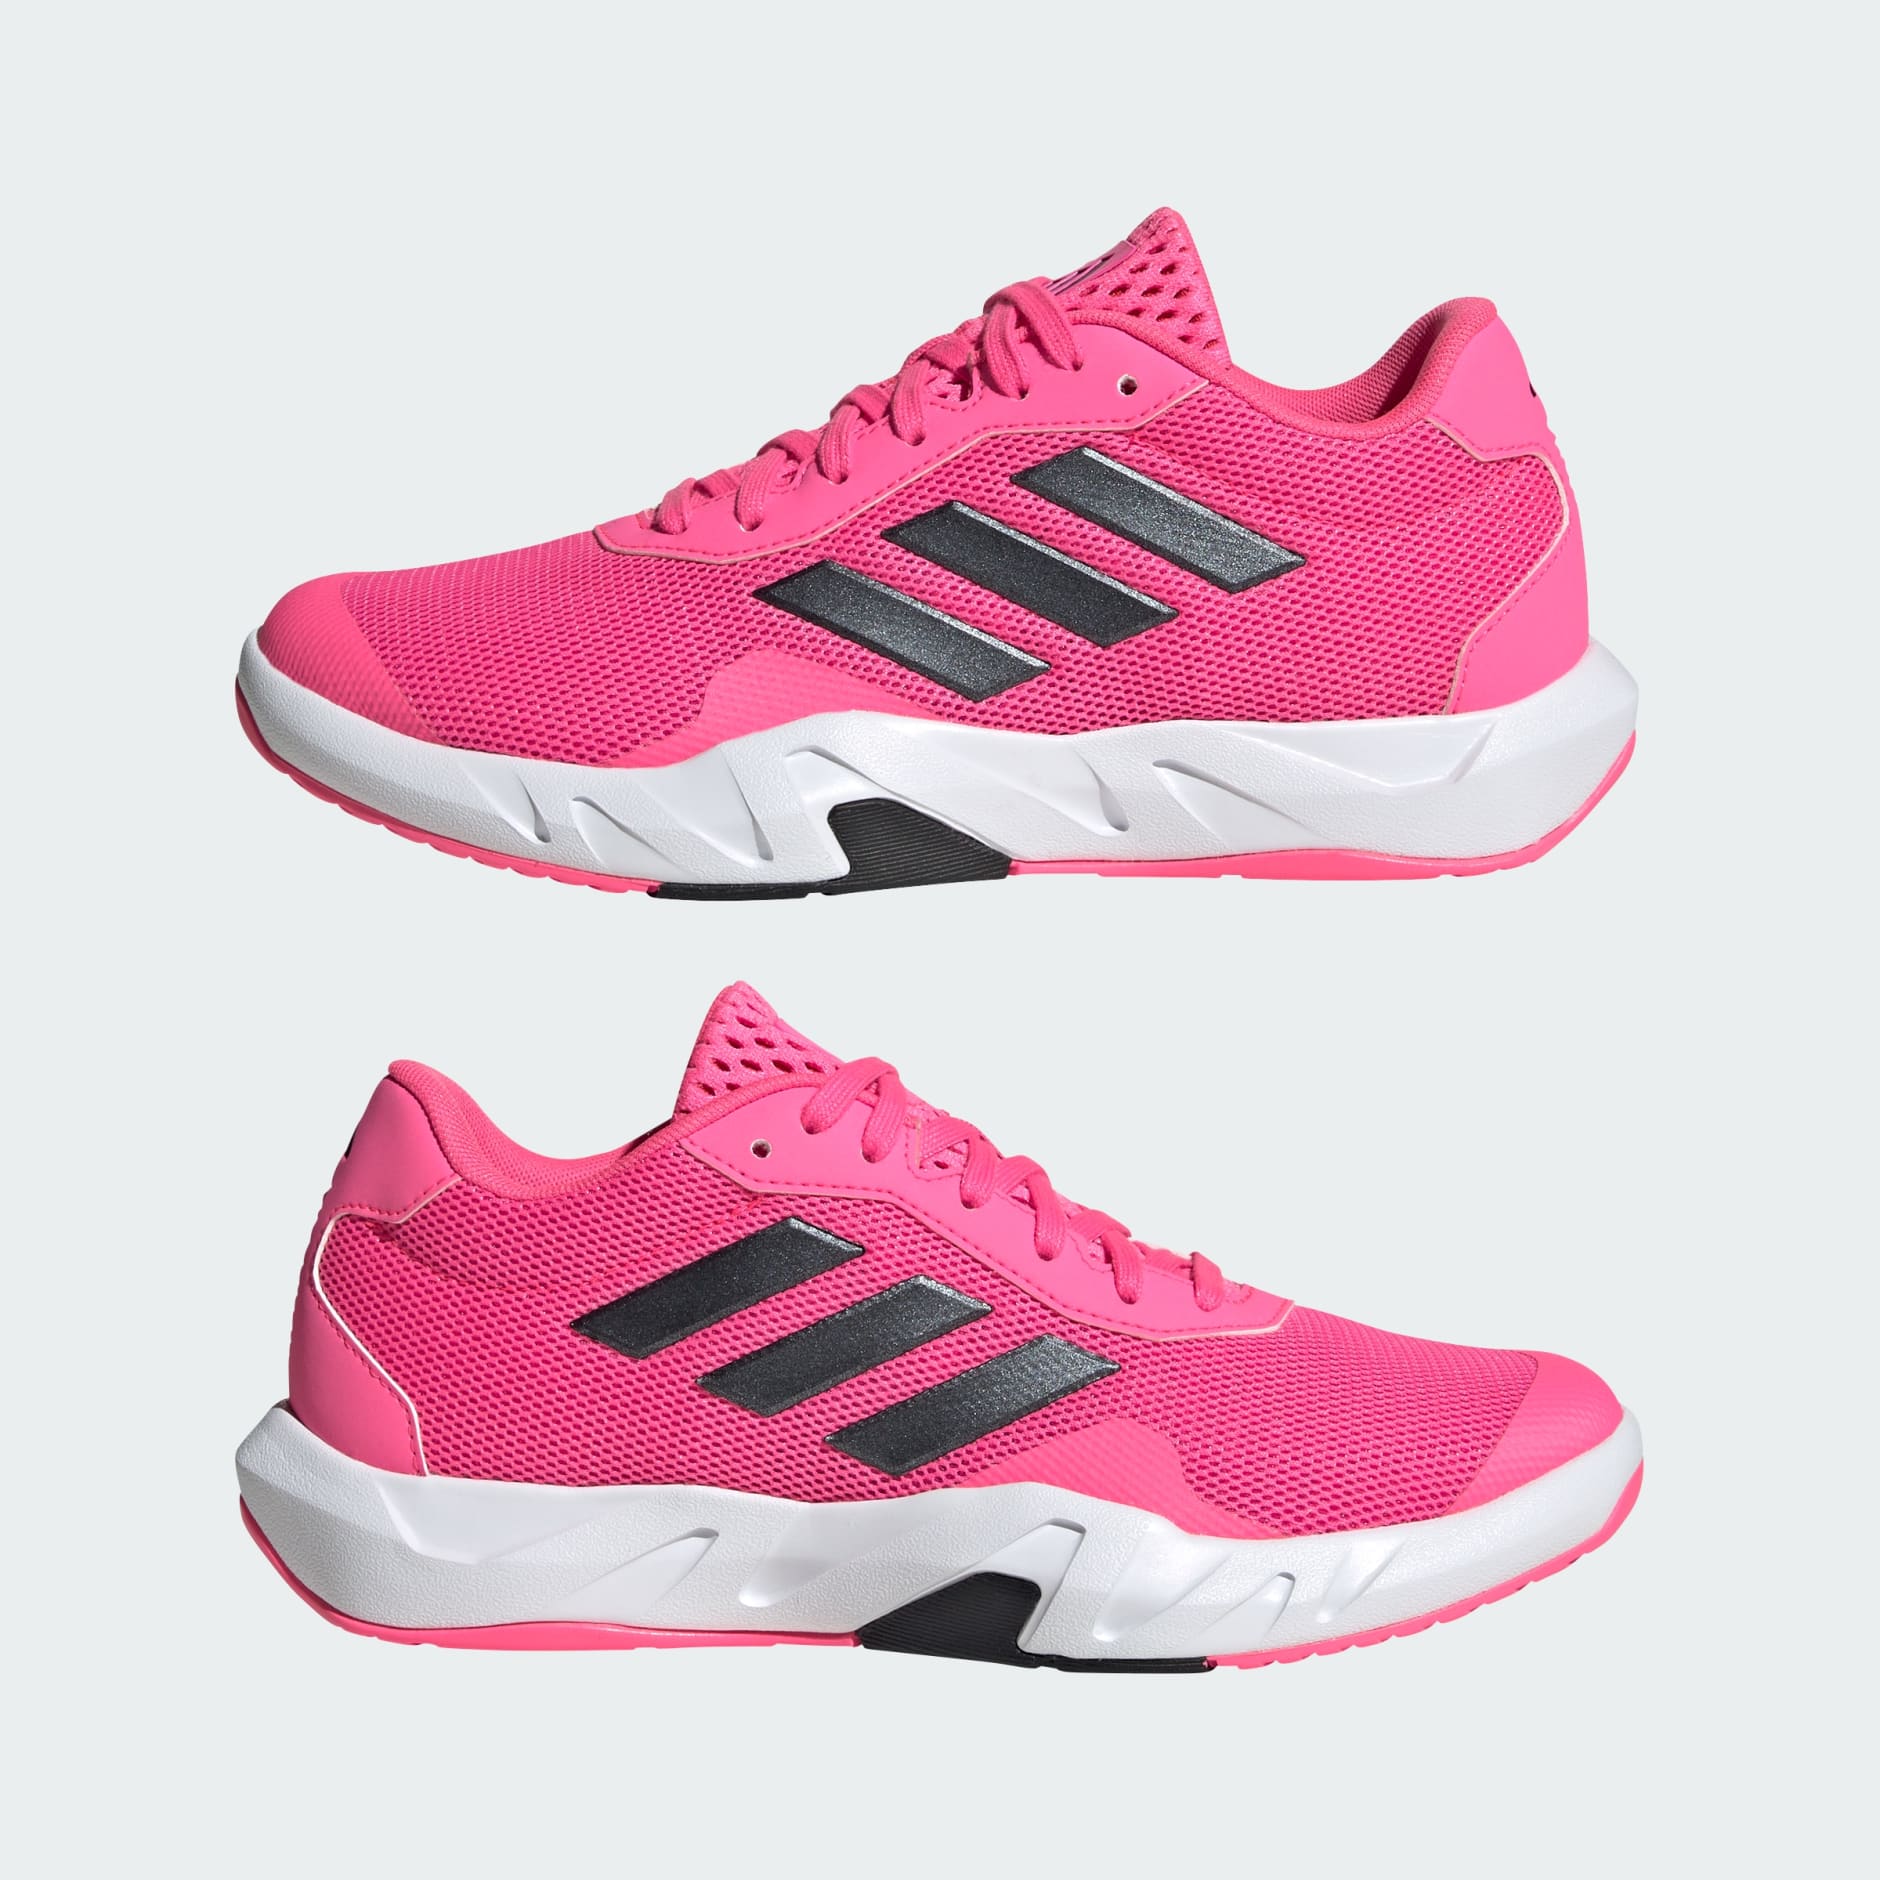 Adidas Campus C Light Pink Sneakers